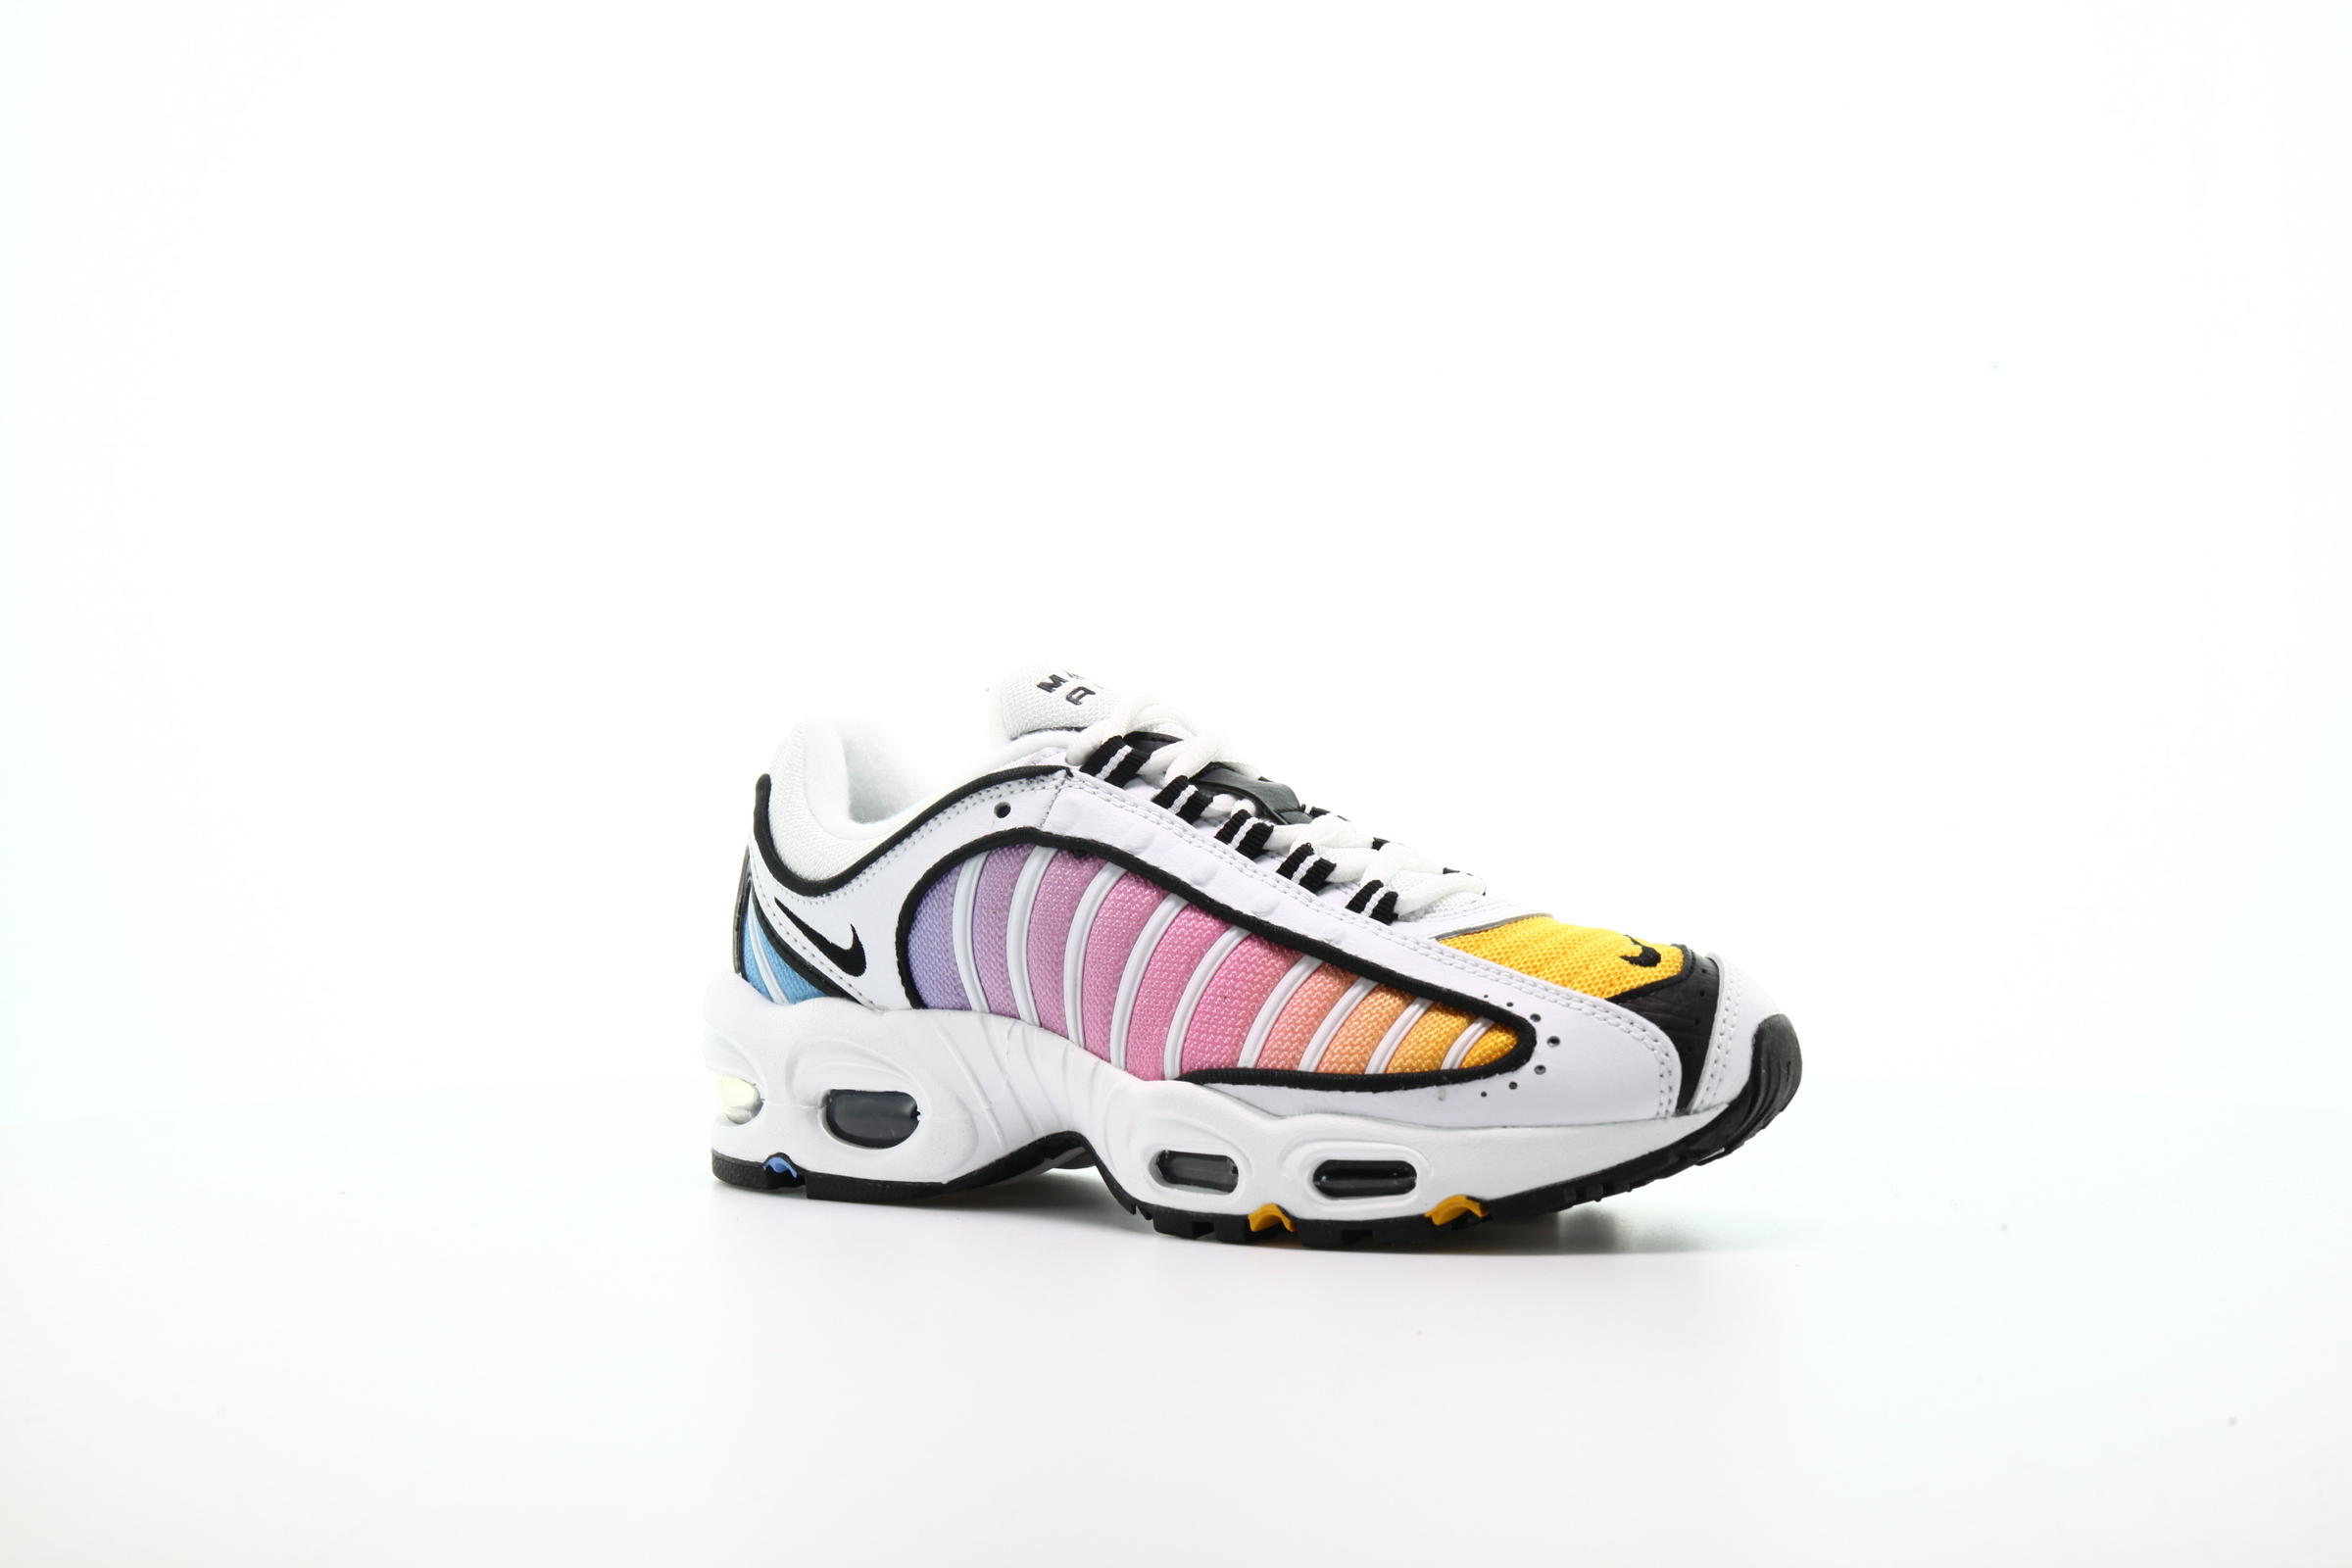 Nike WMNS Air Max Tailwind IV "Multicolor"